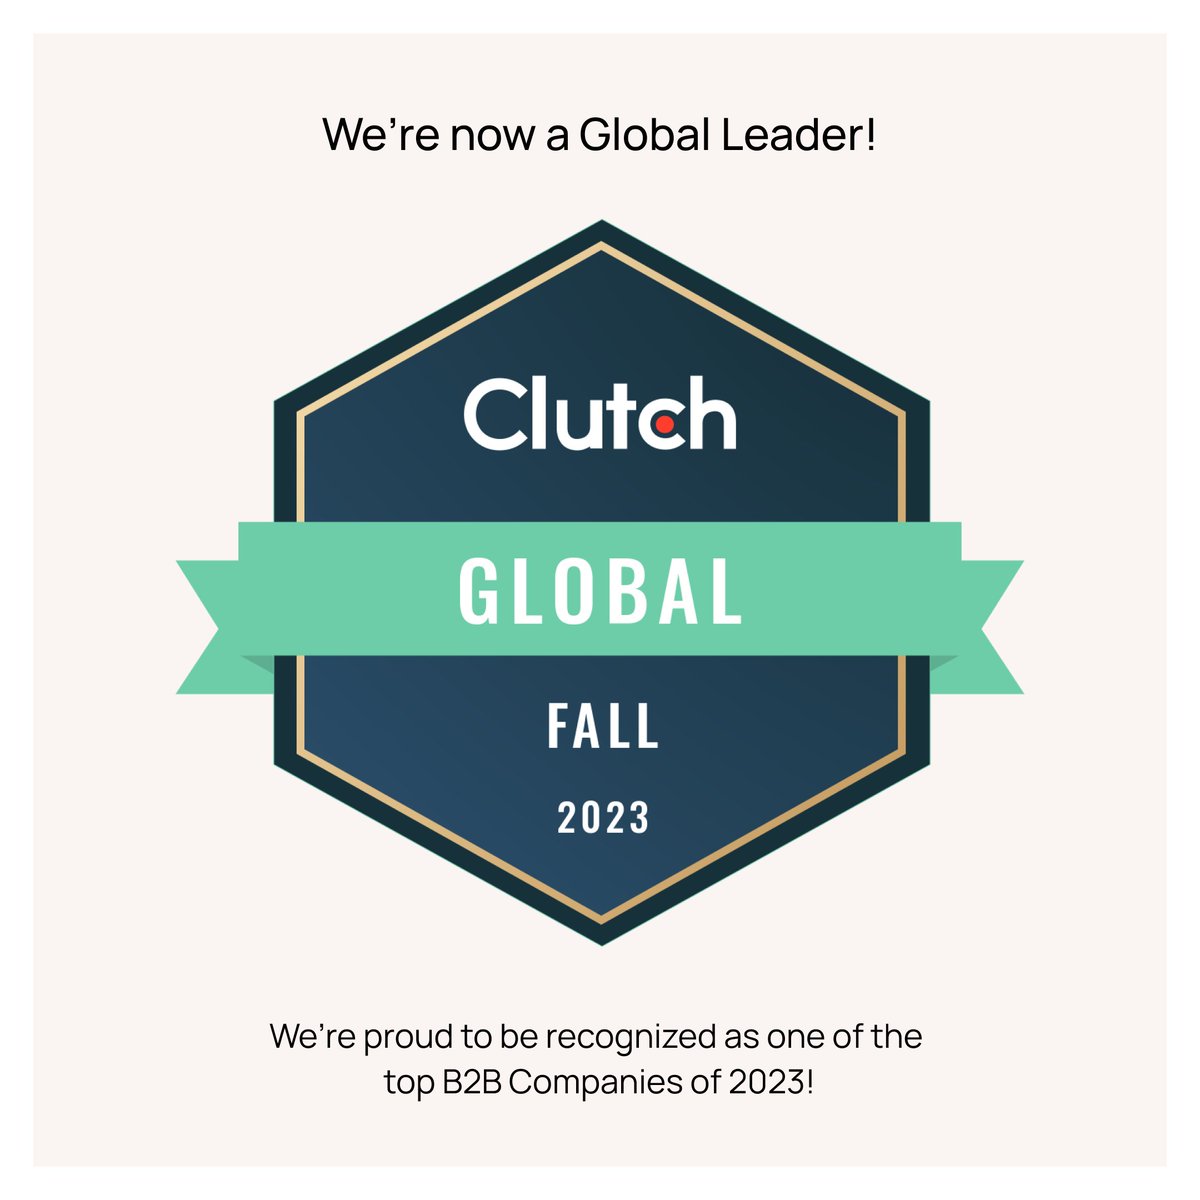 We’re super excited to be recognised as one of the Top B2B Companies of 2023! 🚀 The ‘Clutch Global’ award celebrates excellence in the global B2B services sector, and we’re thrilled to receive this recognition! 🏆 #growth #clutch #b2b #awards #recognition #success #lollypop